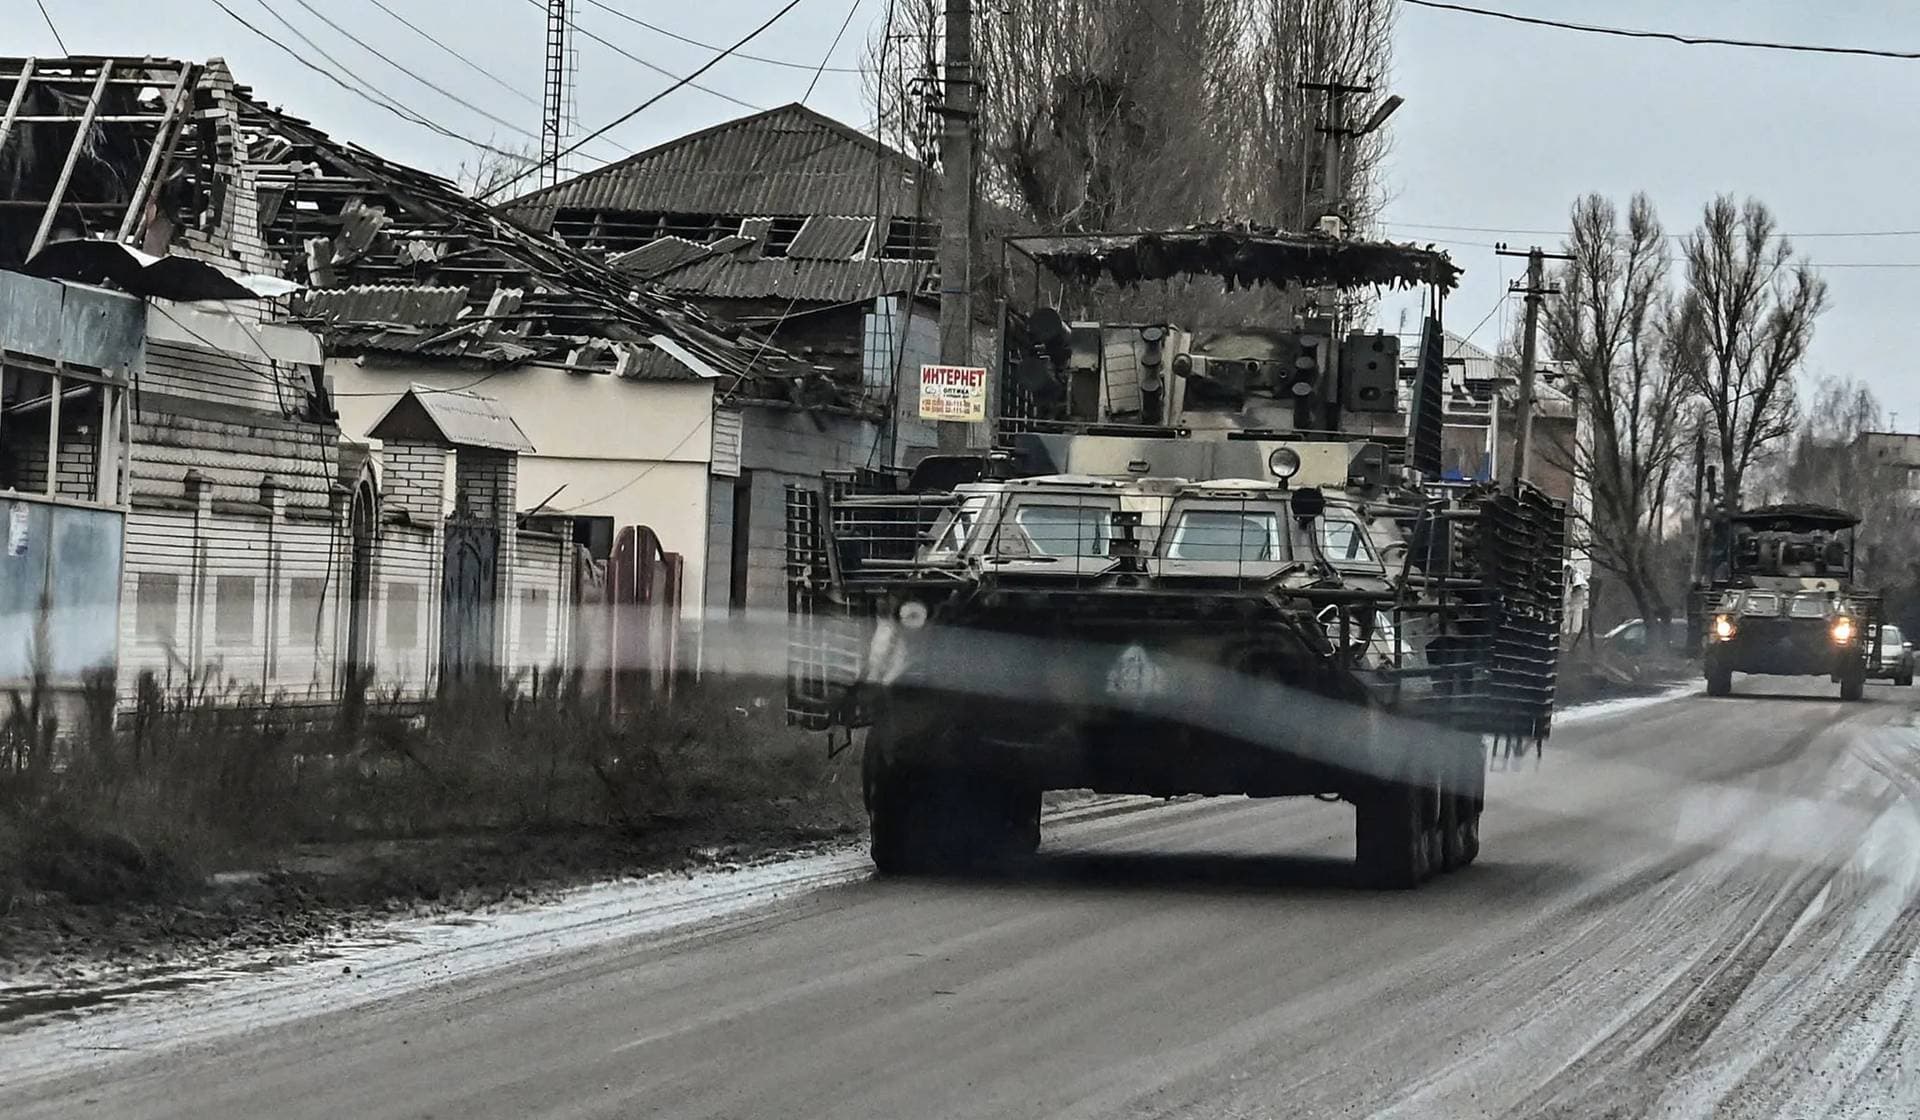 Ukrainian servicemen drive BTR-4 armored personnel carriers along a road in the town of Orikhiv